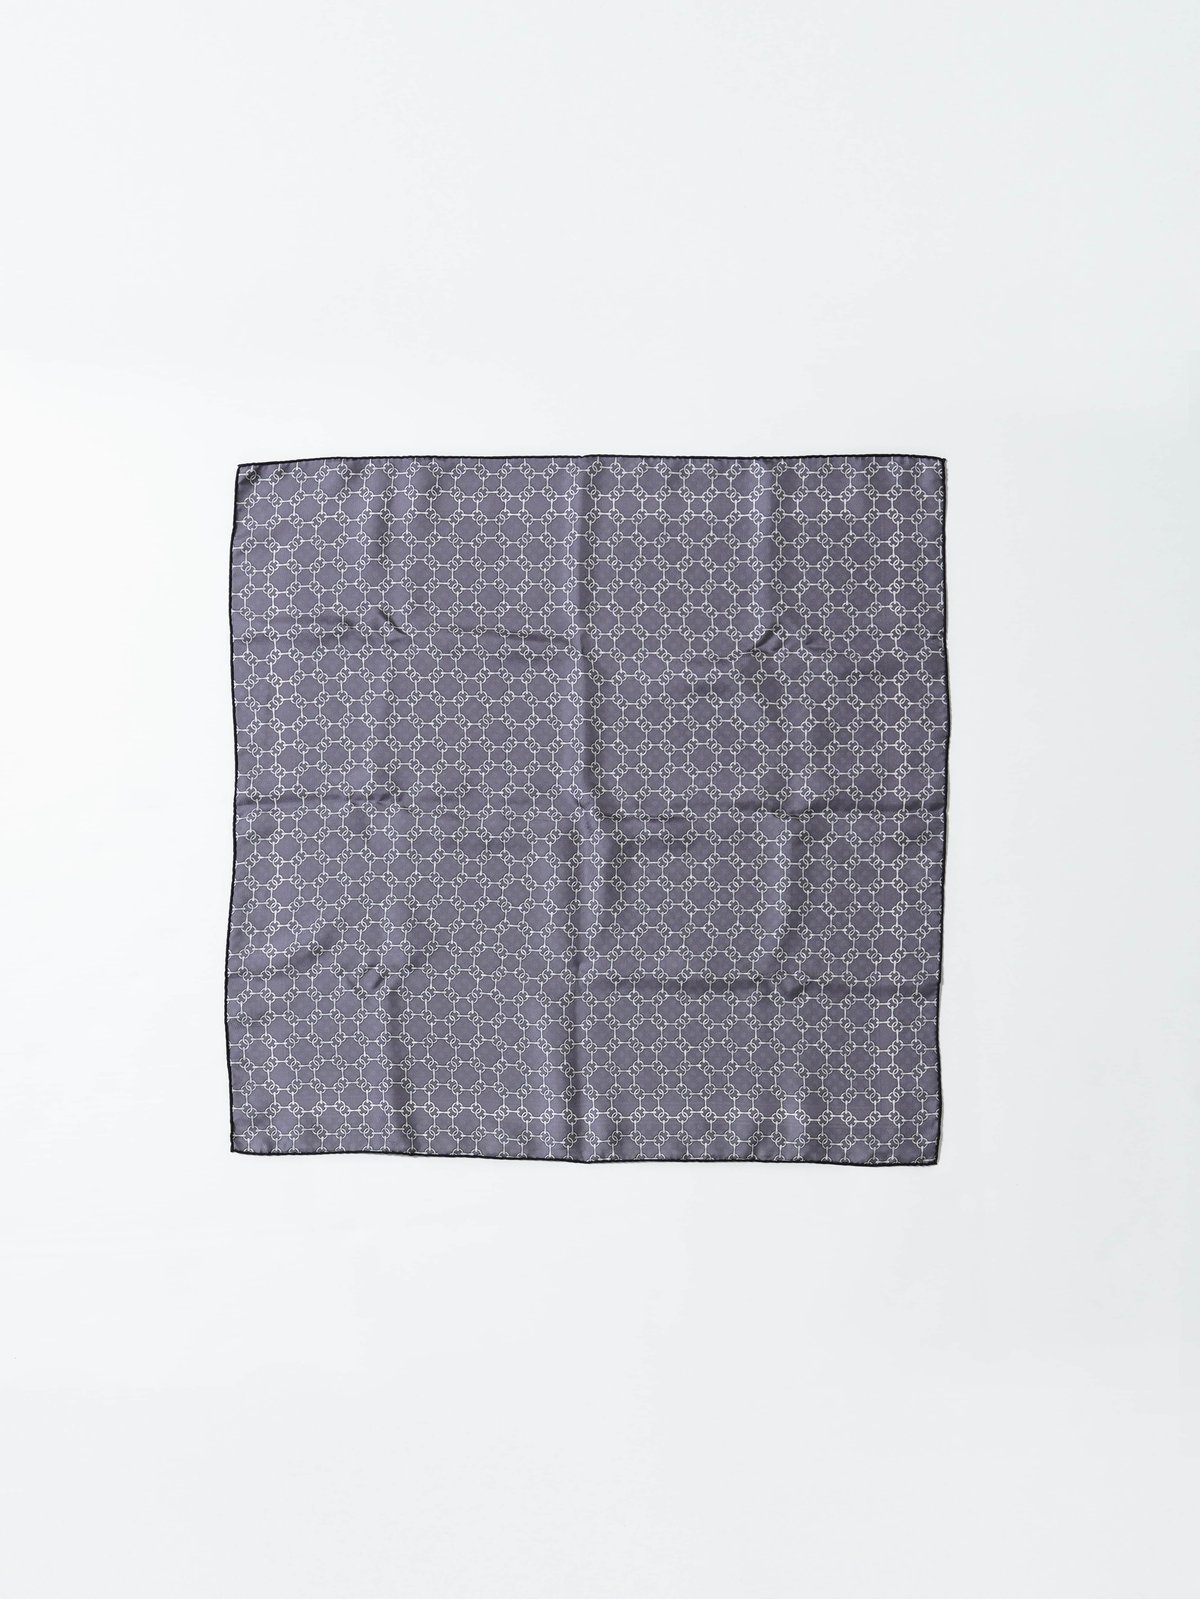 OX JEWELRY High-End Silk Scarf | MB -there is a...